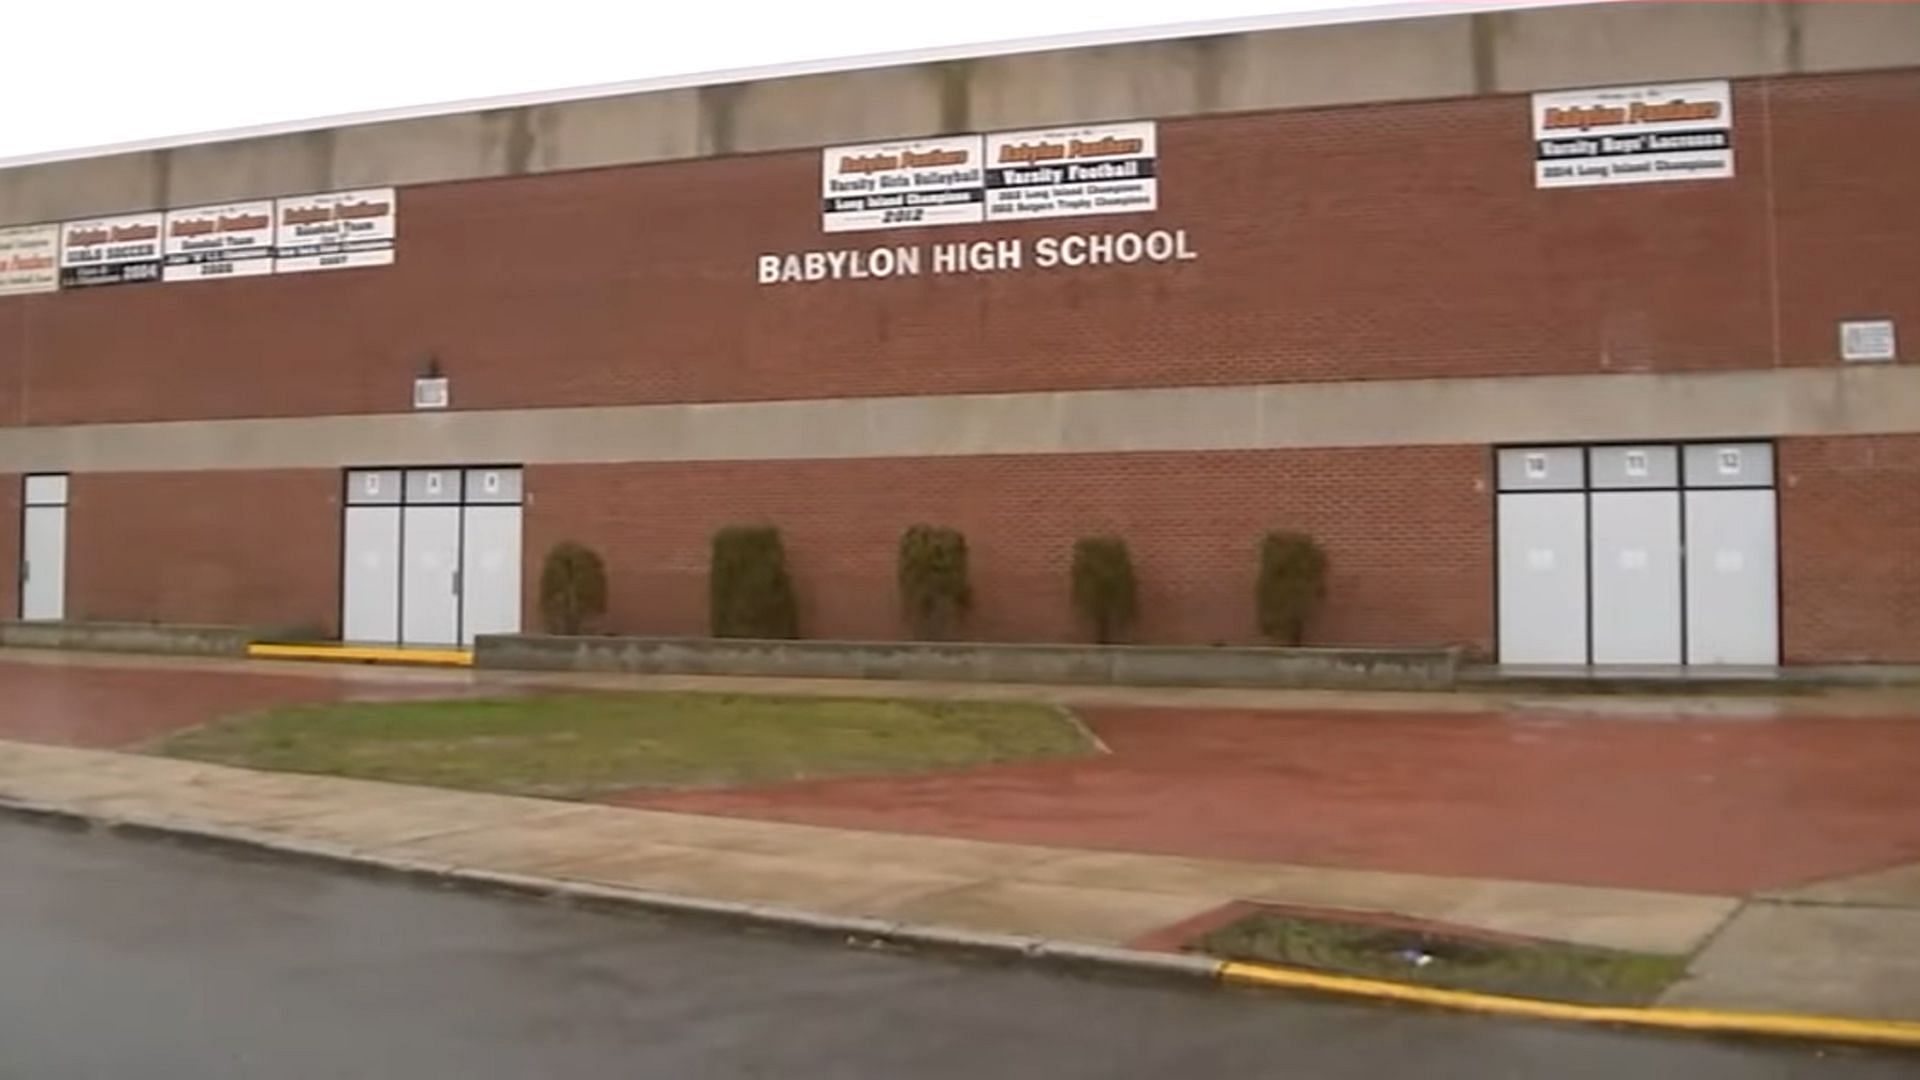 Over 250 students sick after a norovirus outbreak at Babylon High School (Image via YouTube/@Eyewitness News ABC7NY)